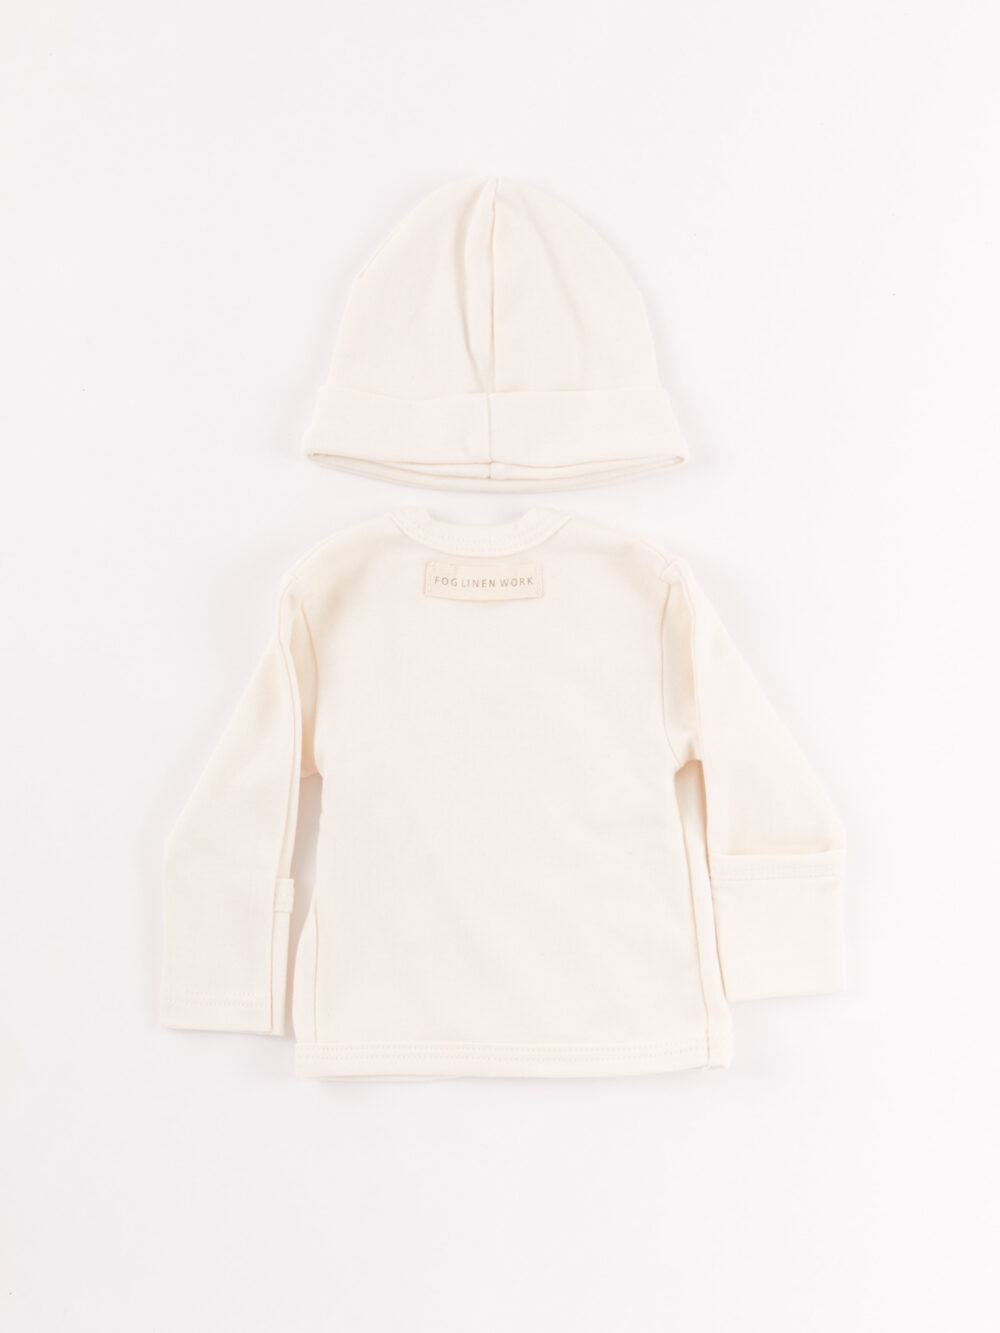 fog linen baby top and hat